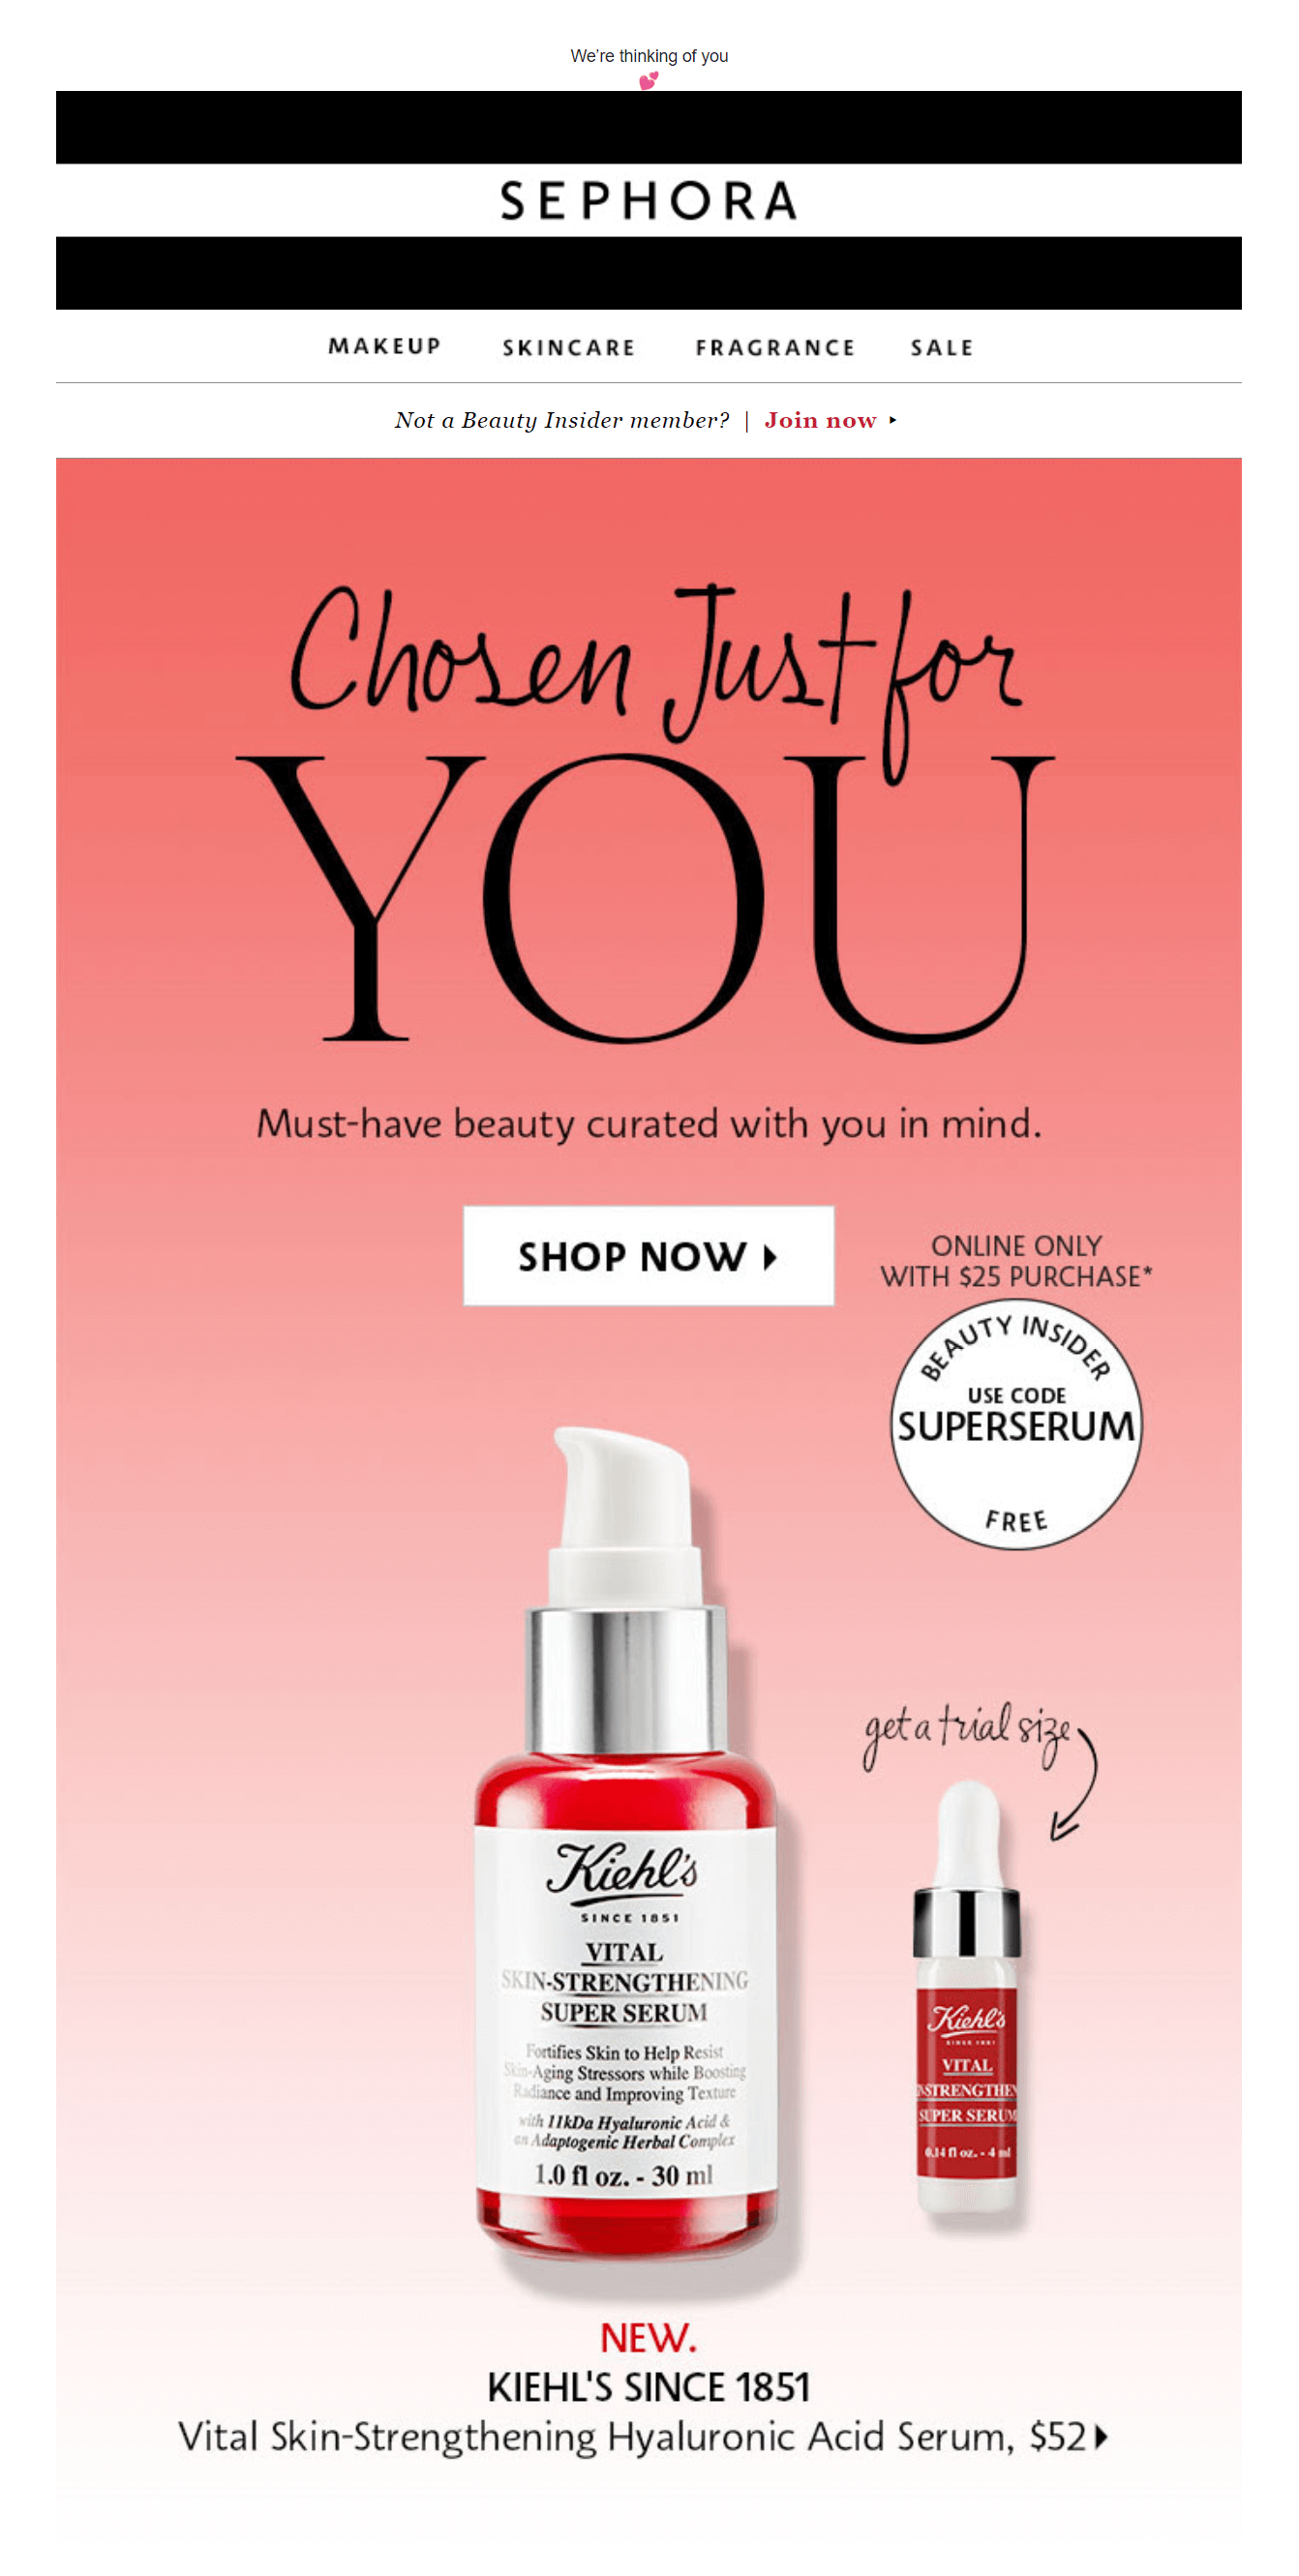 sephora product recommendation email for the beauty industry